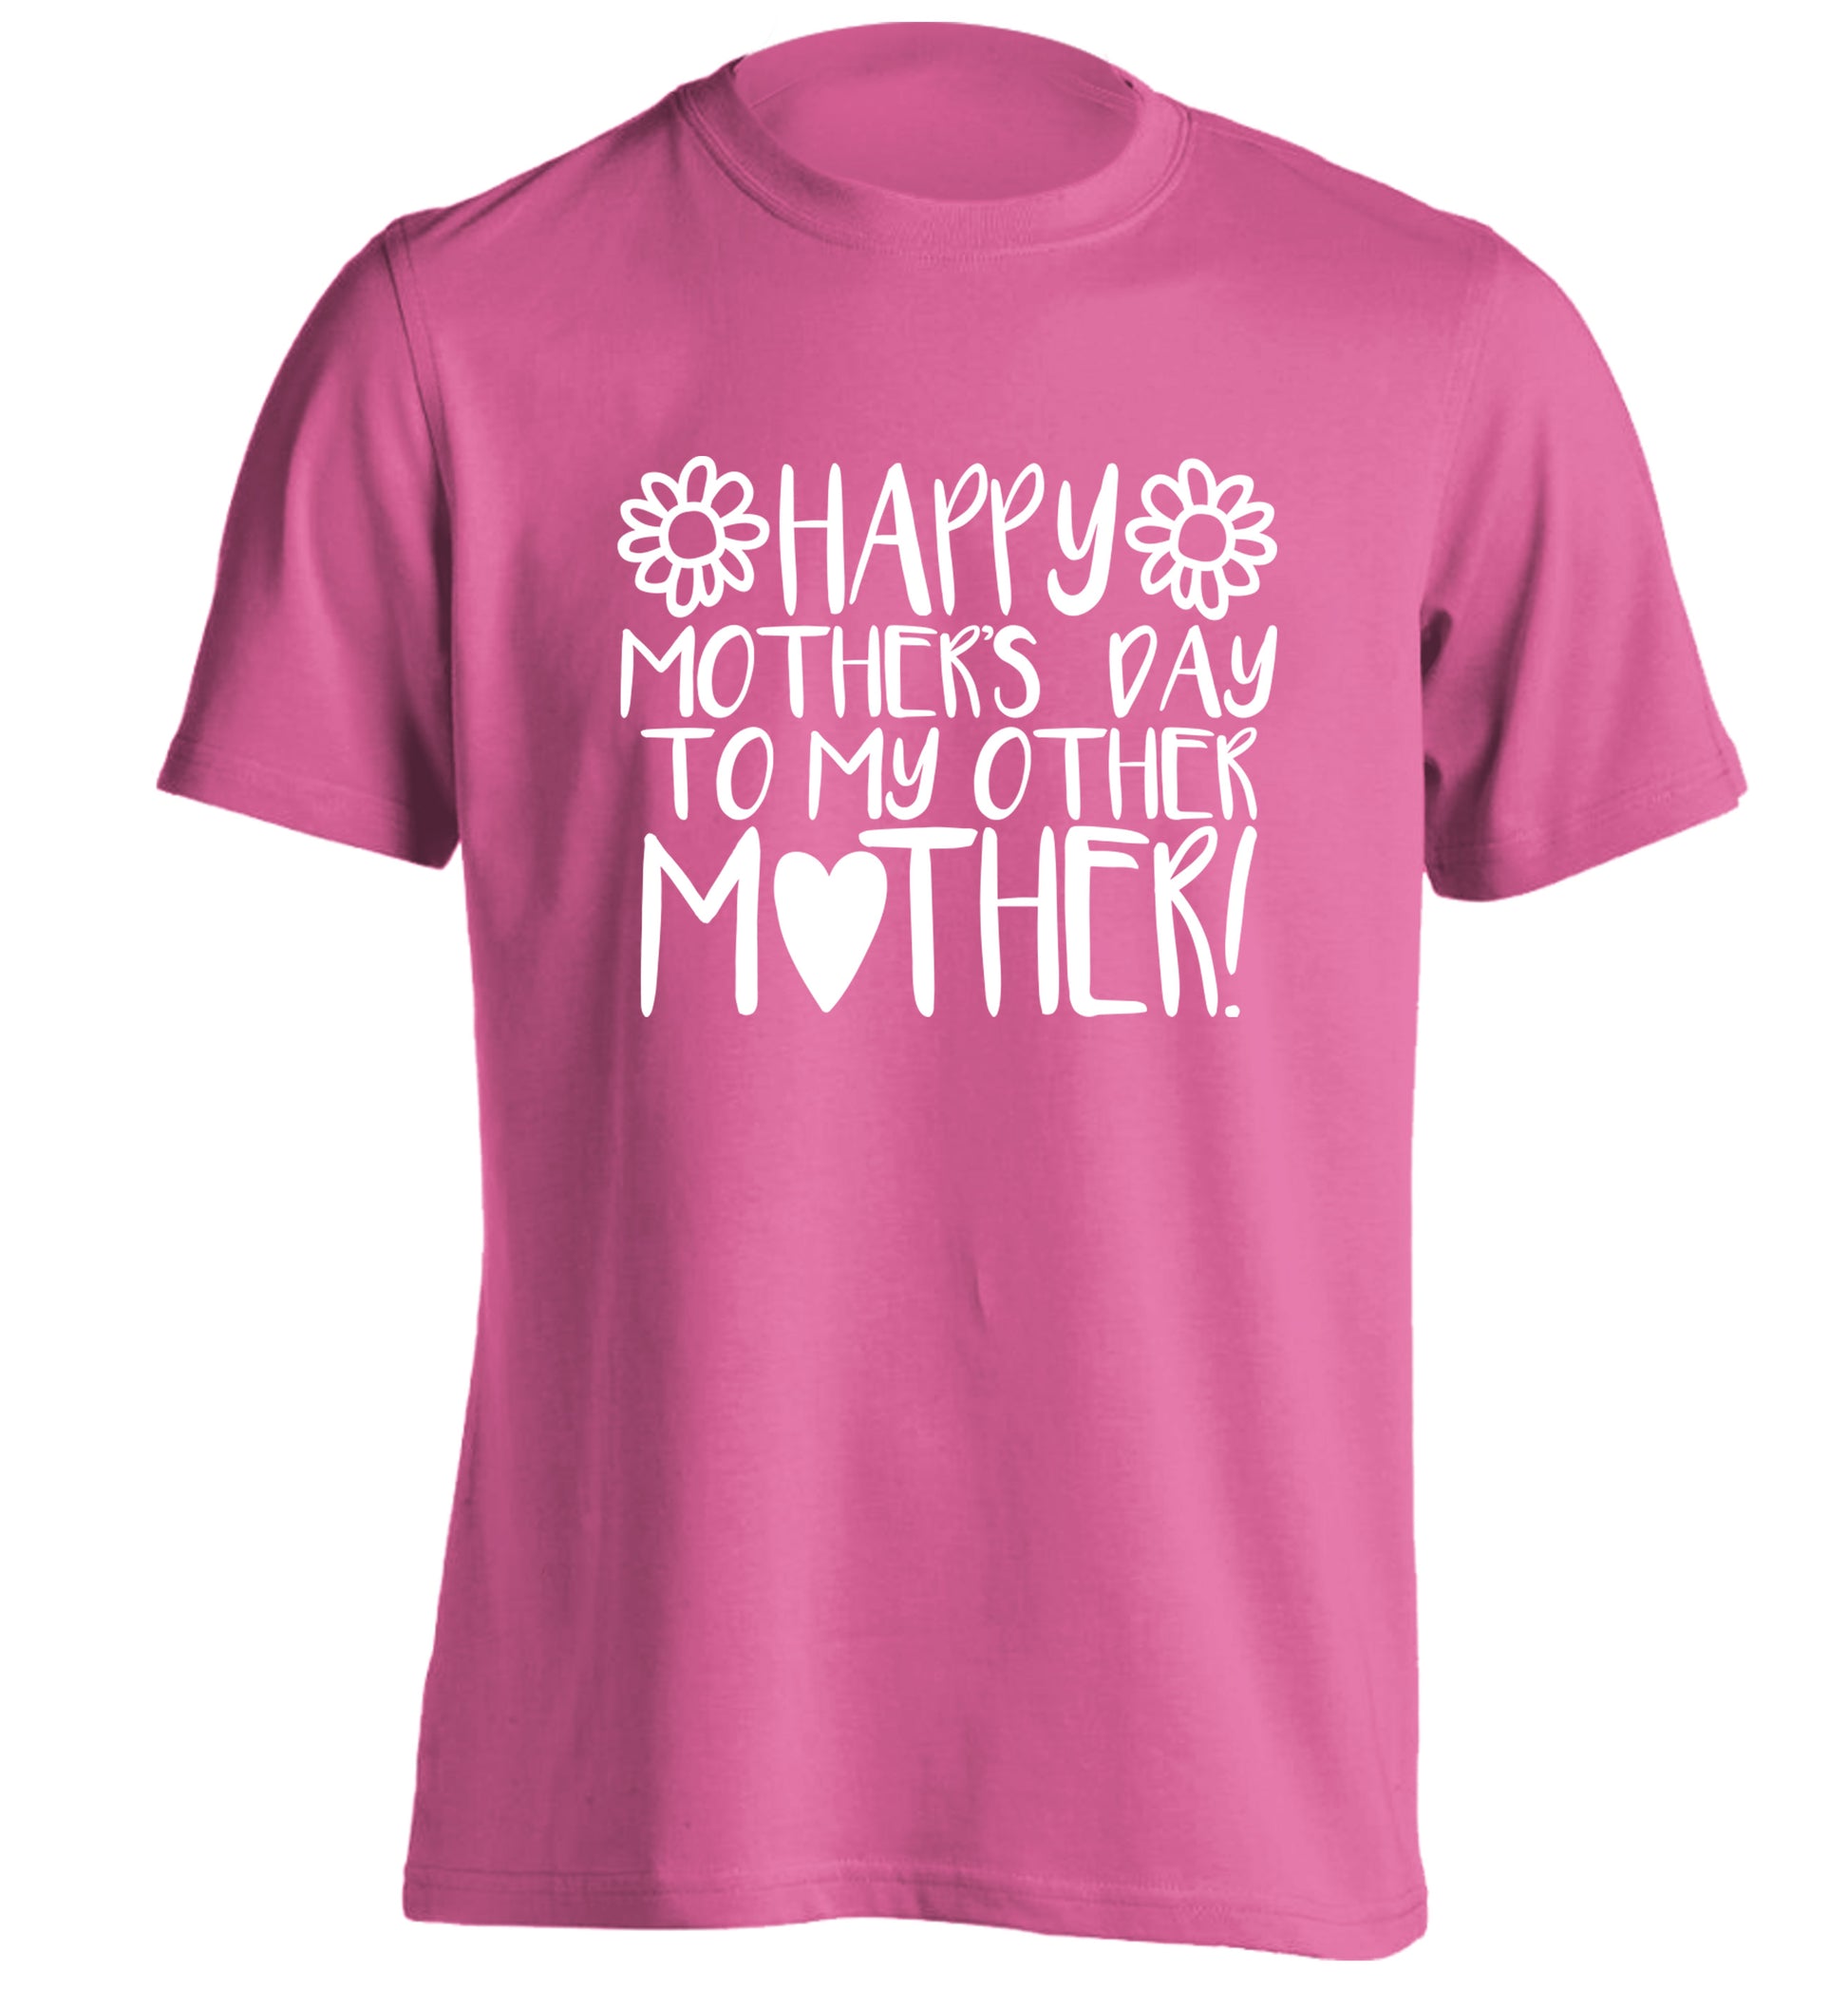 Happy mother's day to my other mother adults unisex pink Tshirt 2XL